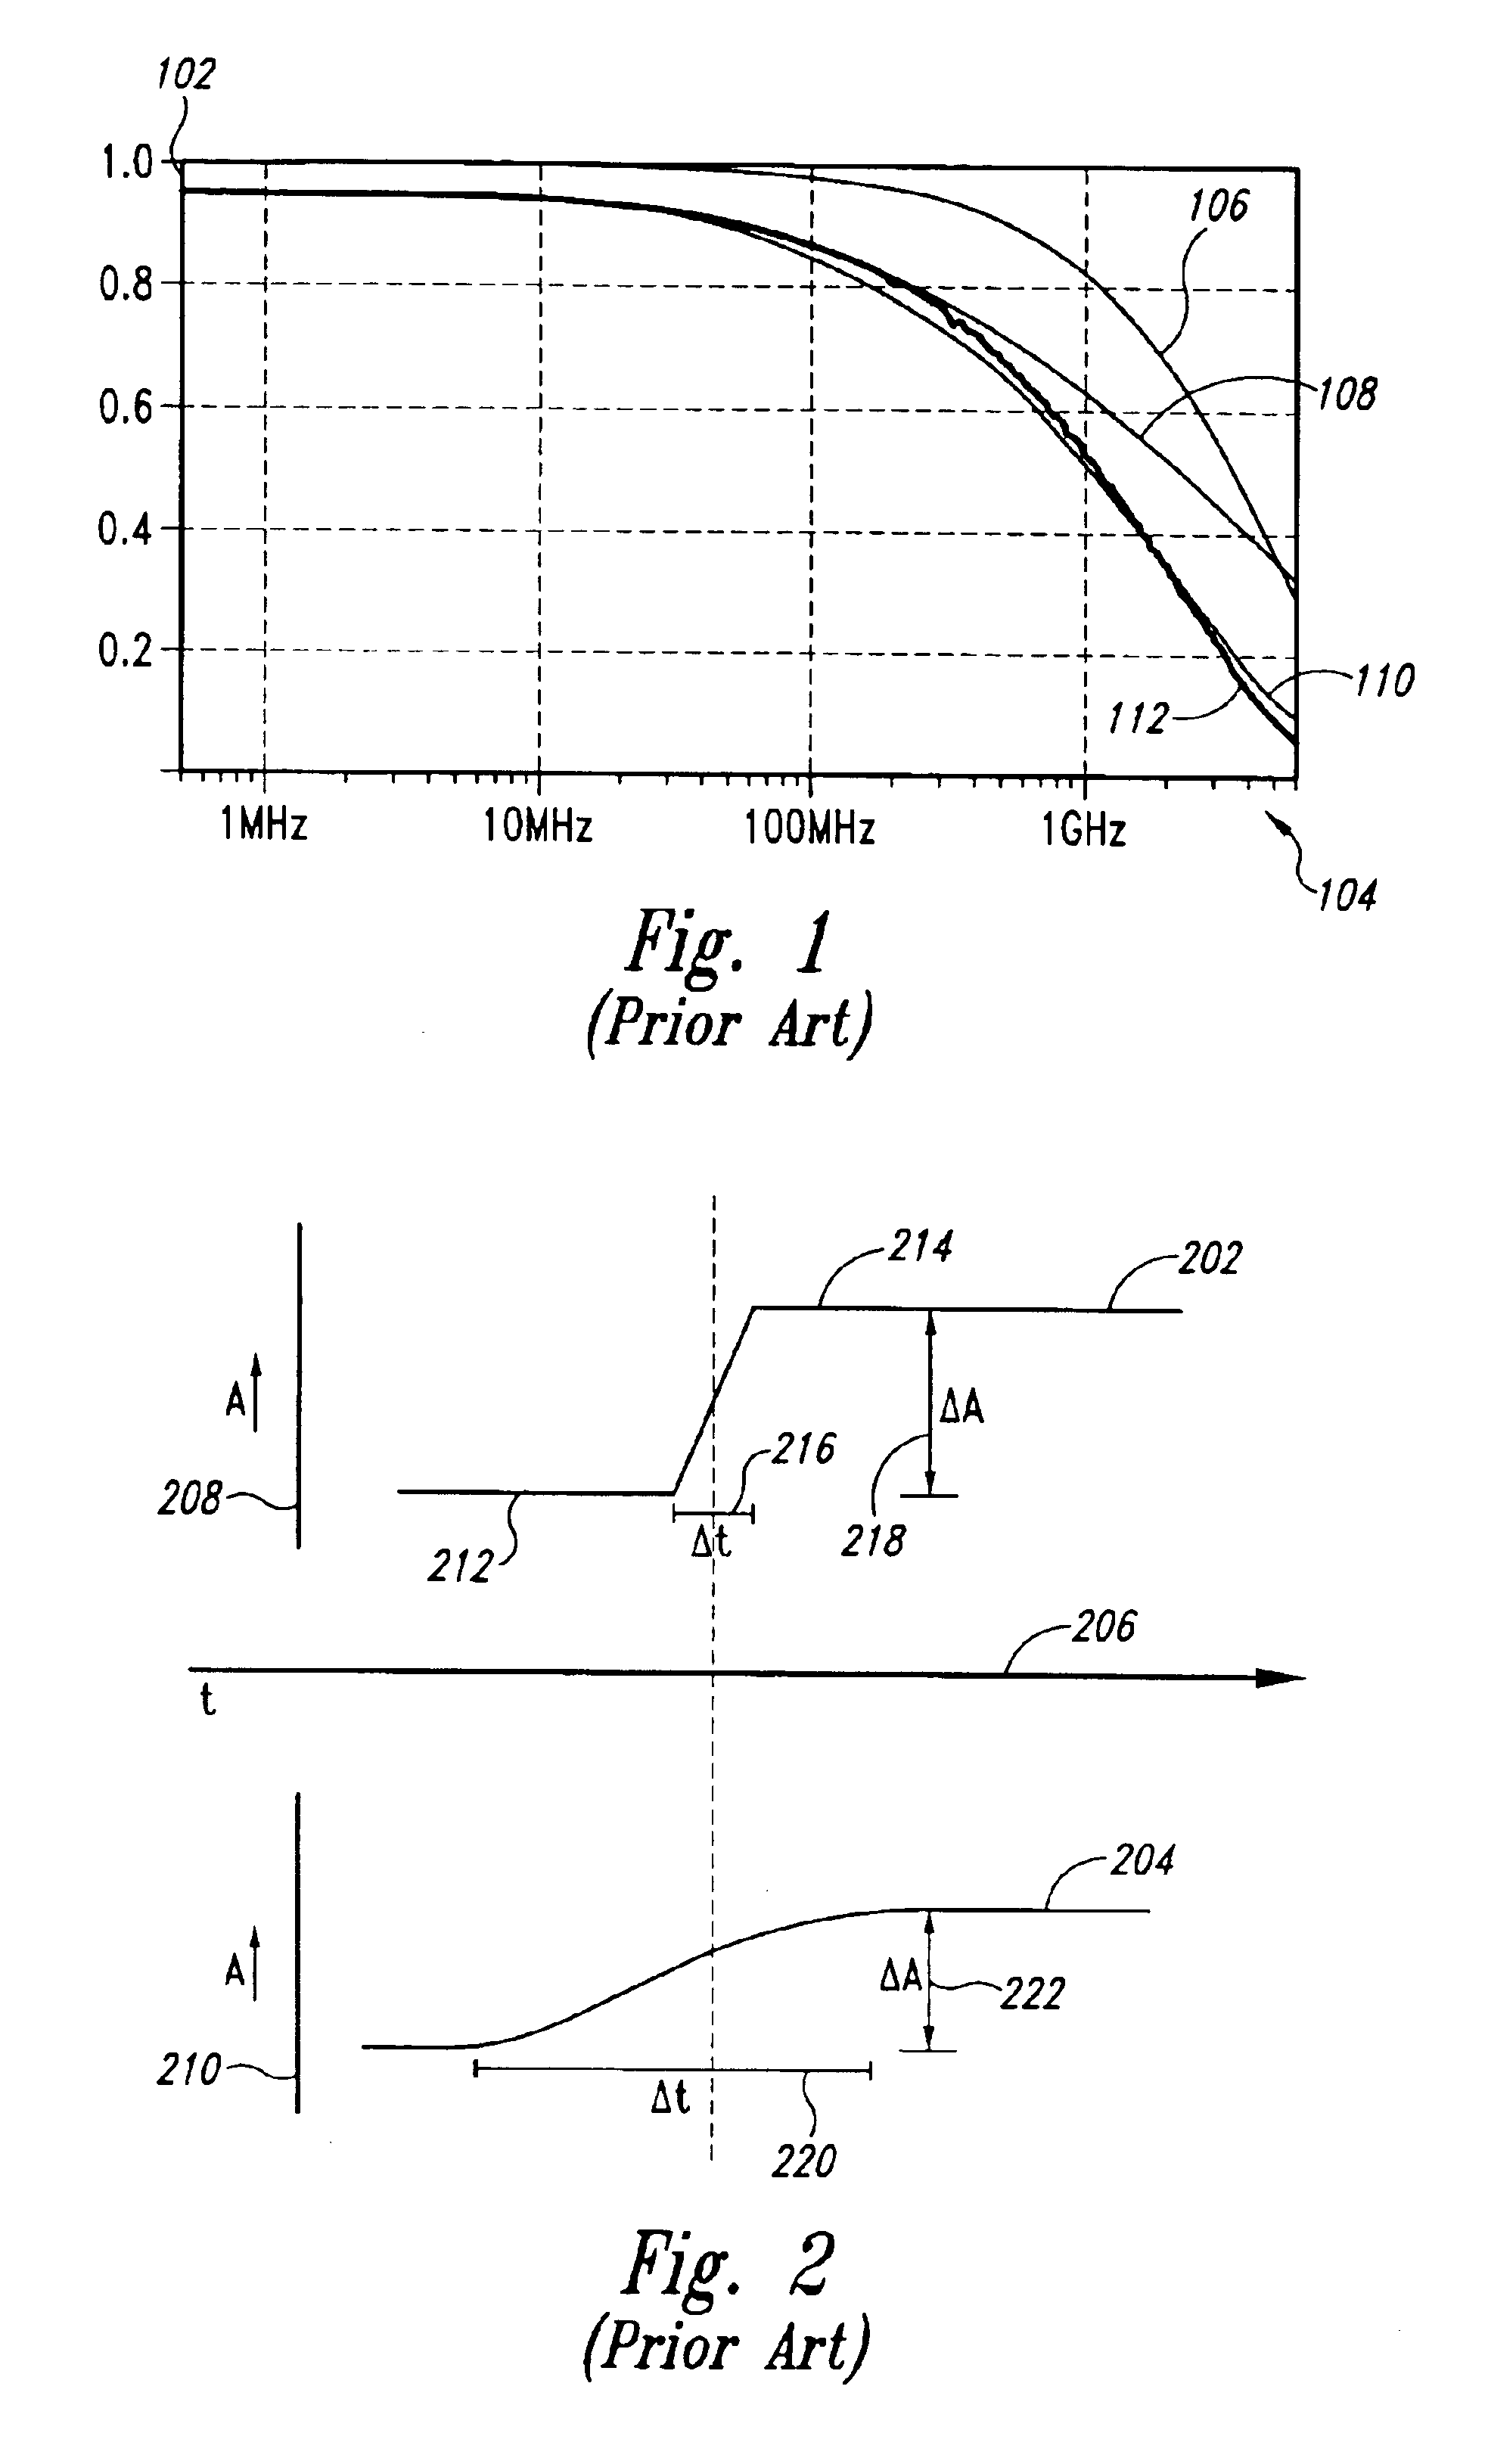 Method for fabricating a filament affixed trace within an electronic device